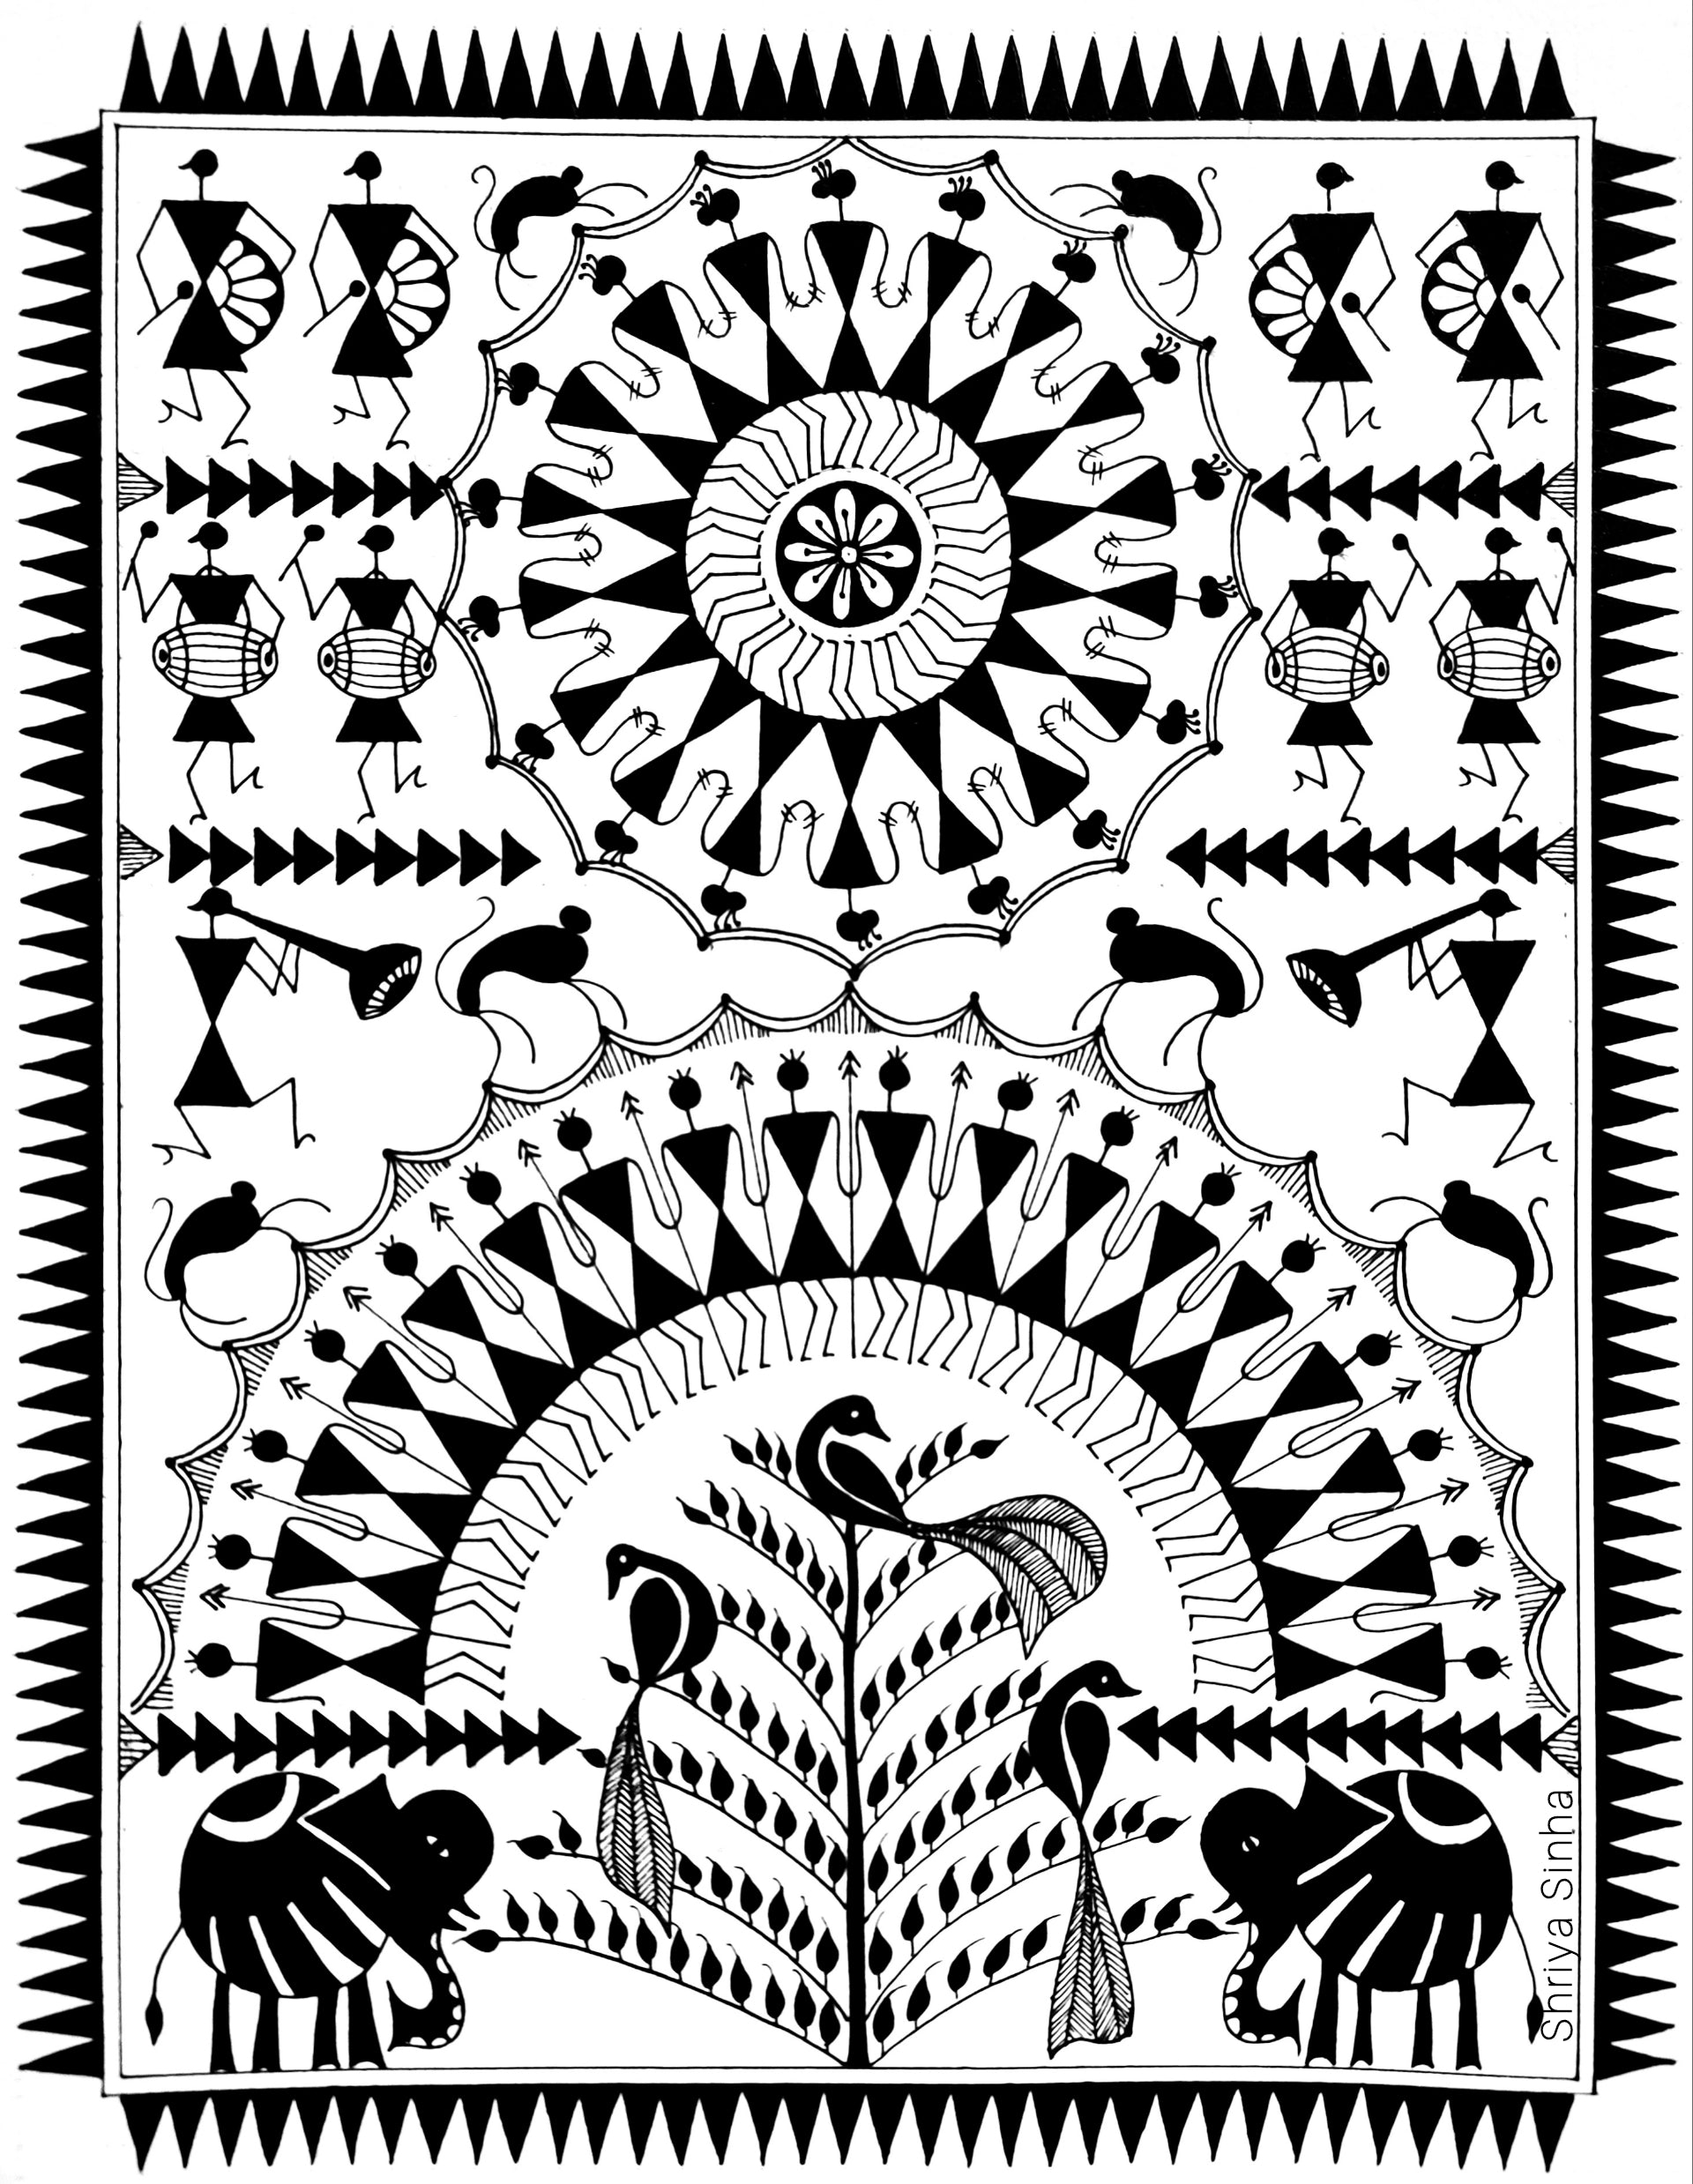 Warli (Indian Folk Art) Masterclass by Shriya Sinha on October 9th, 10 –  MadCap - For the Imperfect You !